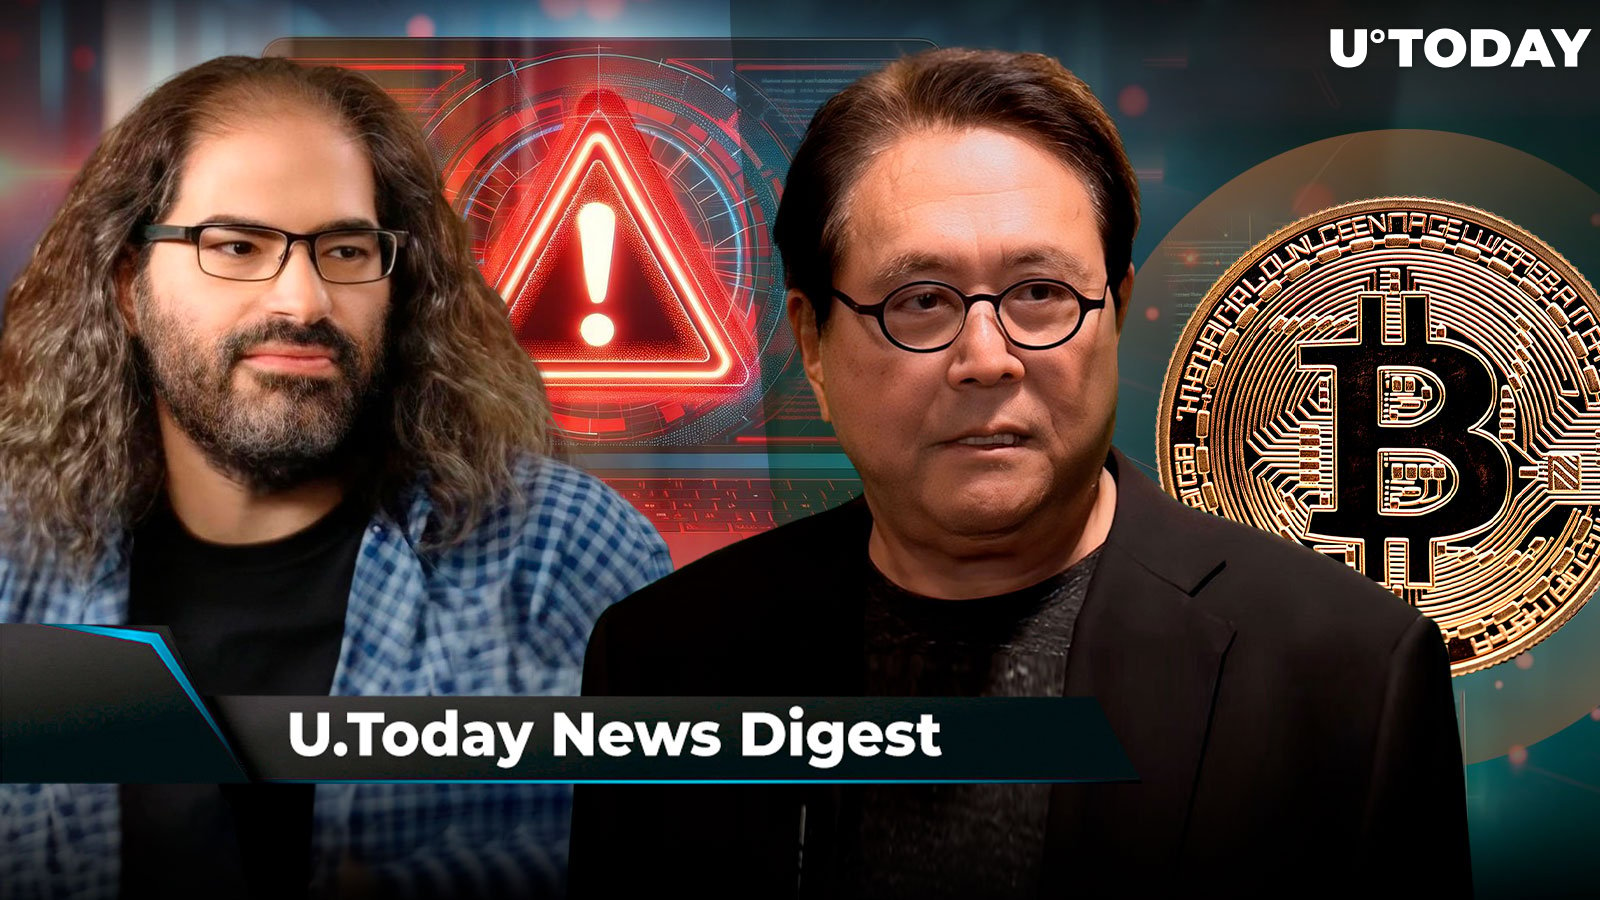 Ripple CTO Issues Major Warning to XRP Army, 'Rich Dad Poor Dad' Author Makes Stunning BTC Price Prediction, SHIB and ADA Explode on Whale Activity - U.Today's Crypto News Digest